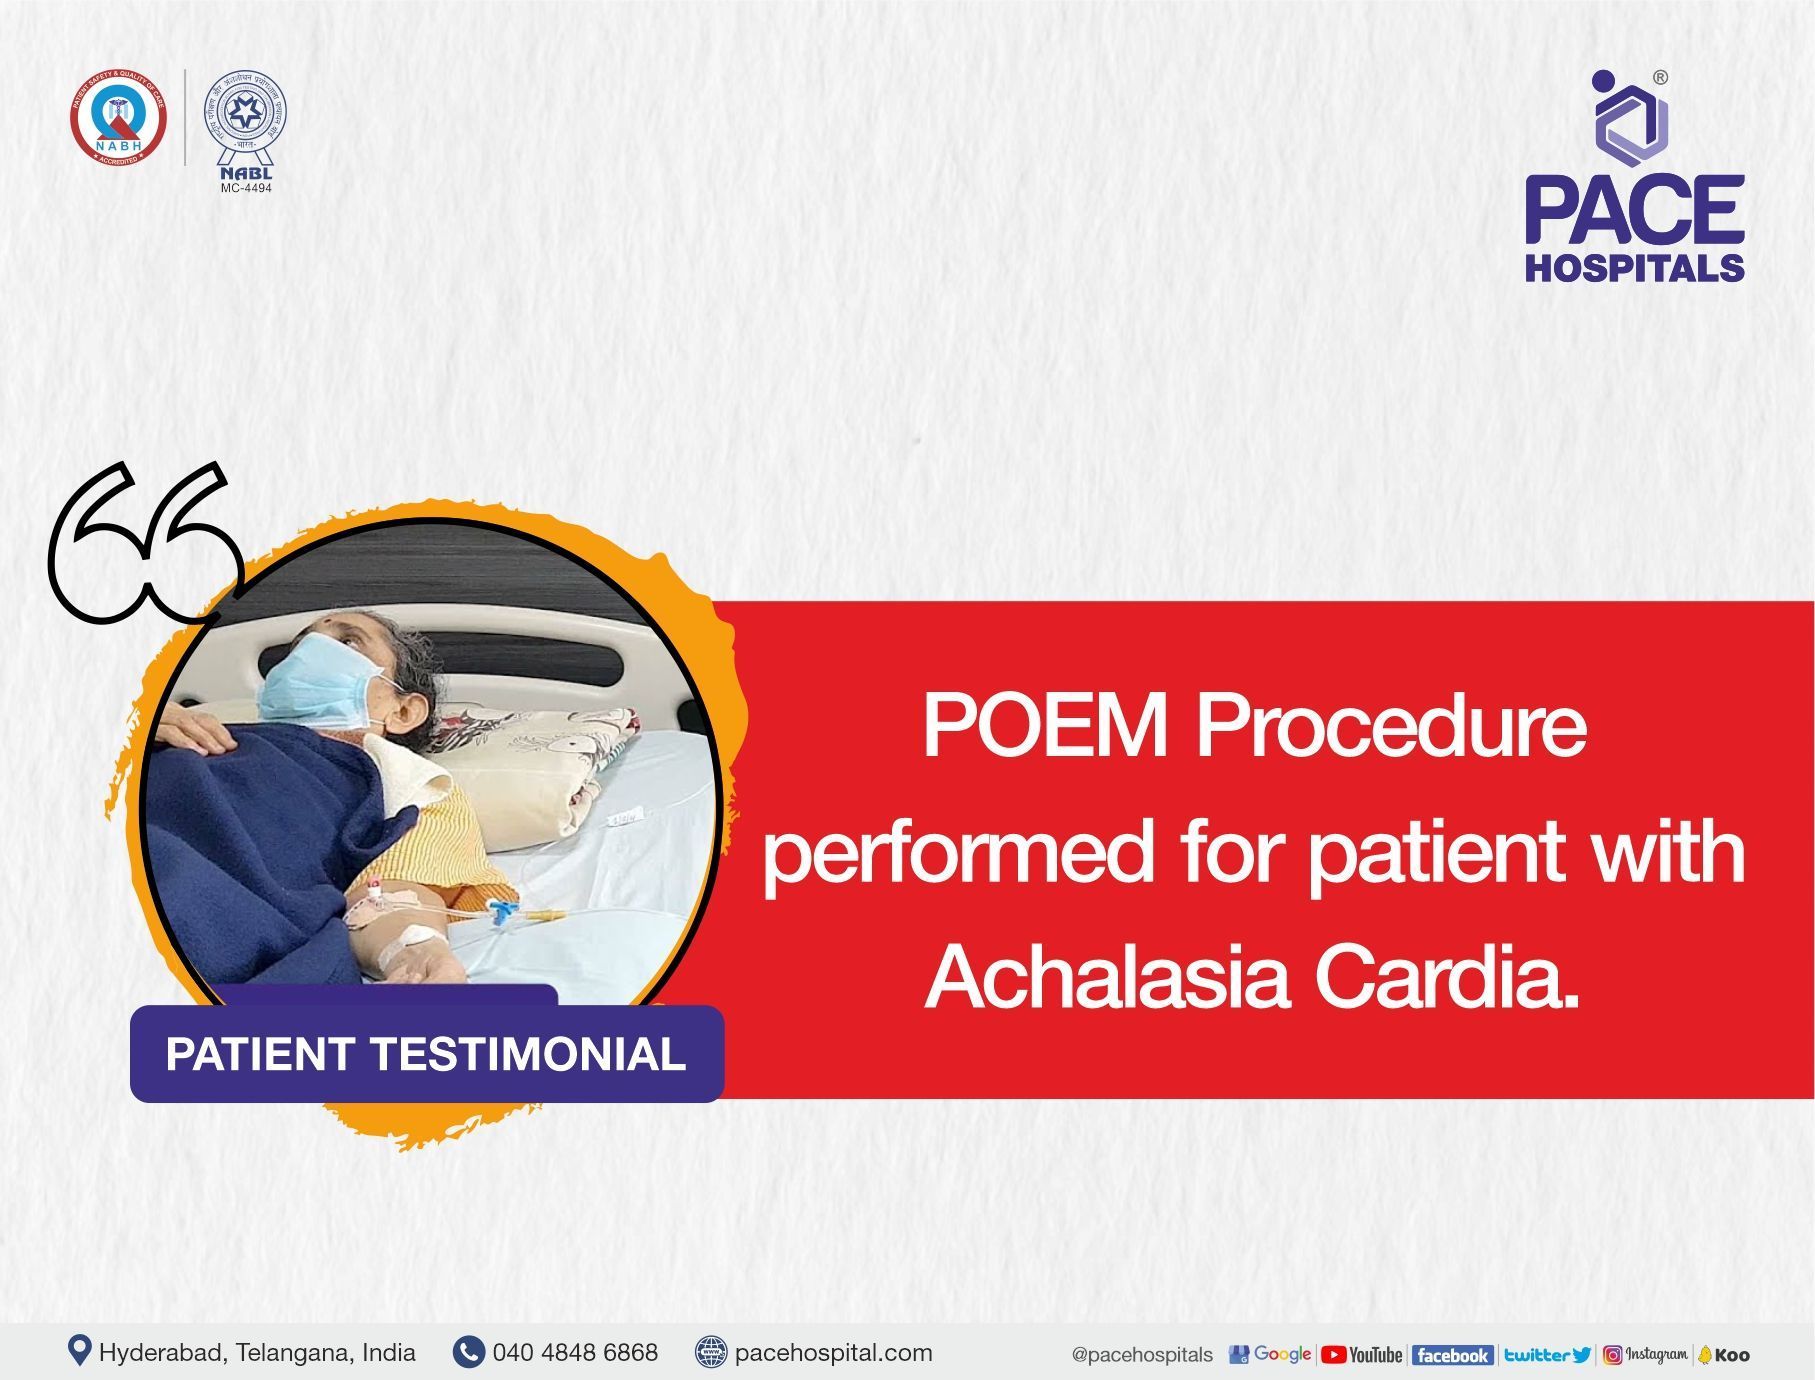 POEM Surgery for treatment of Achalasia Cardia, Swallowing difficulty